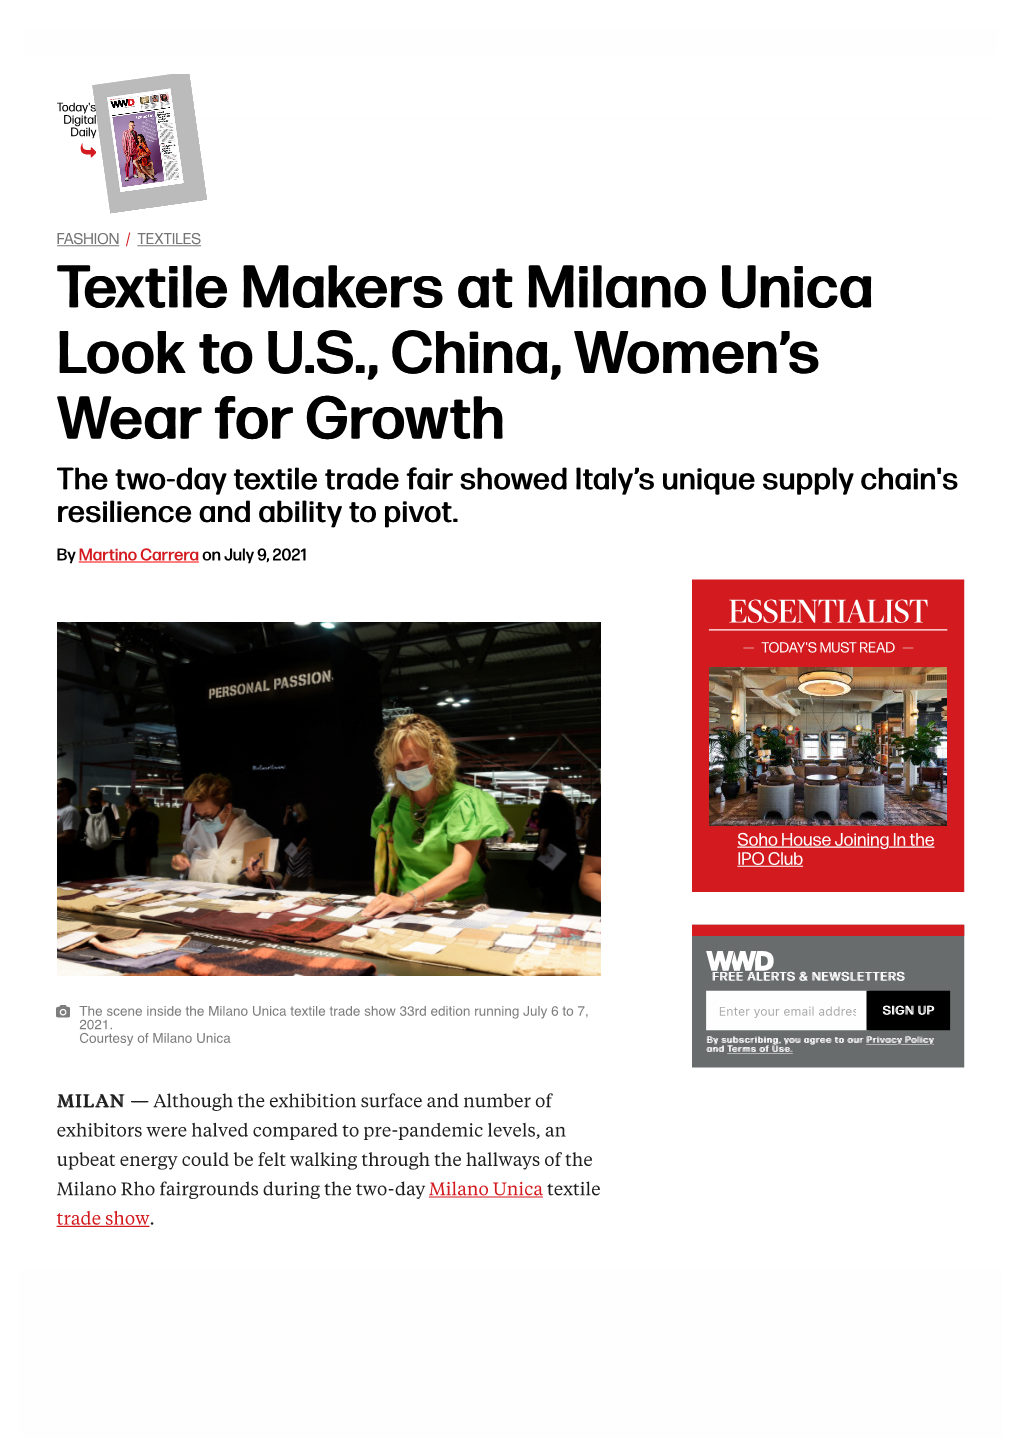 The Fall 2022 Textiles and Fabrics Trends Seen at Milano Unica – WWD 14/07/21, 13:06